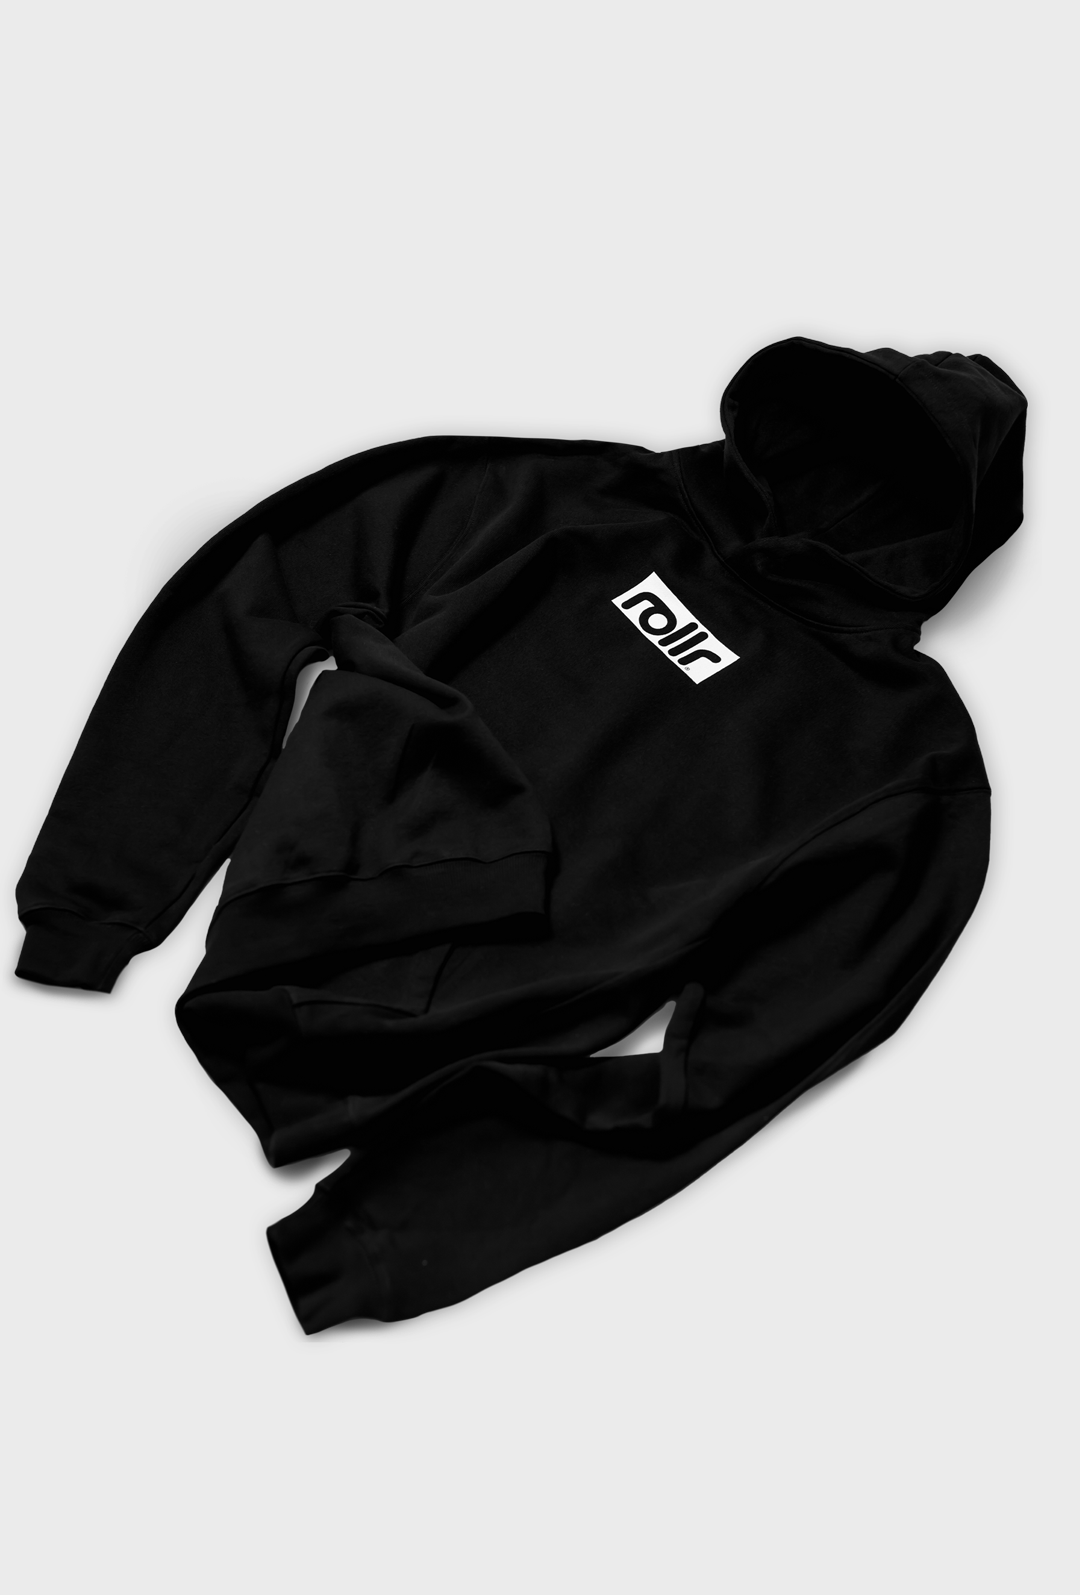 roller clothing oversized hoodie made from french terry cotton and rollr logo print and black label with rollr logo